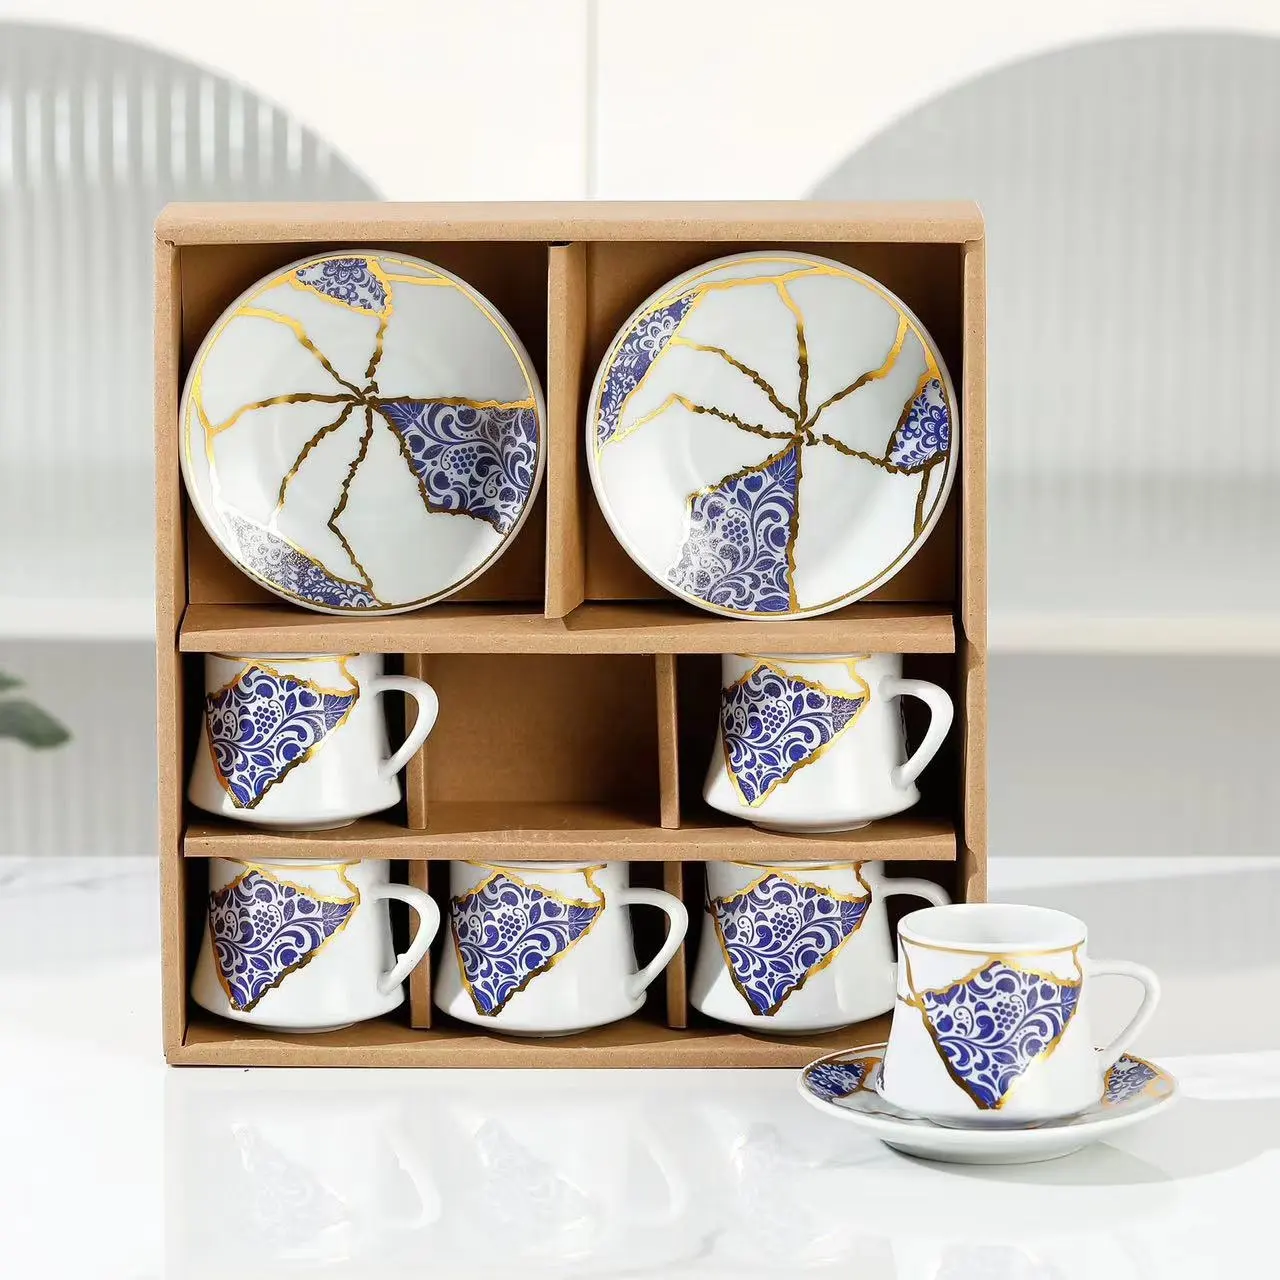 New Modern Luxury Ceramic Cup Set Exquisite Turkish Ceramic Tea Cup Set Personalized Decal Cup And Saucer Set For Party